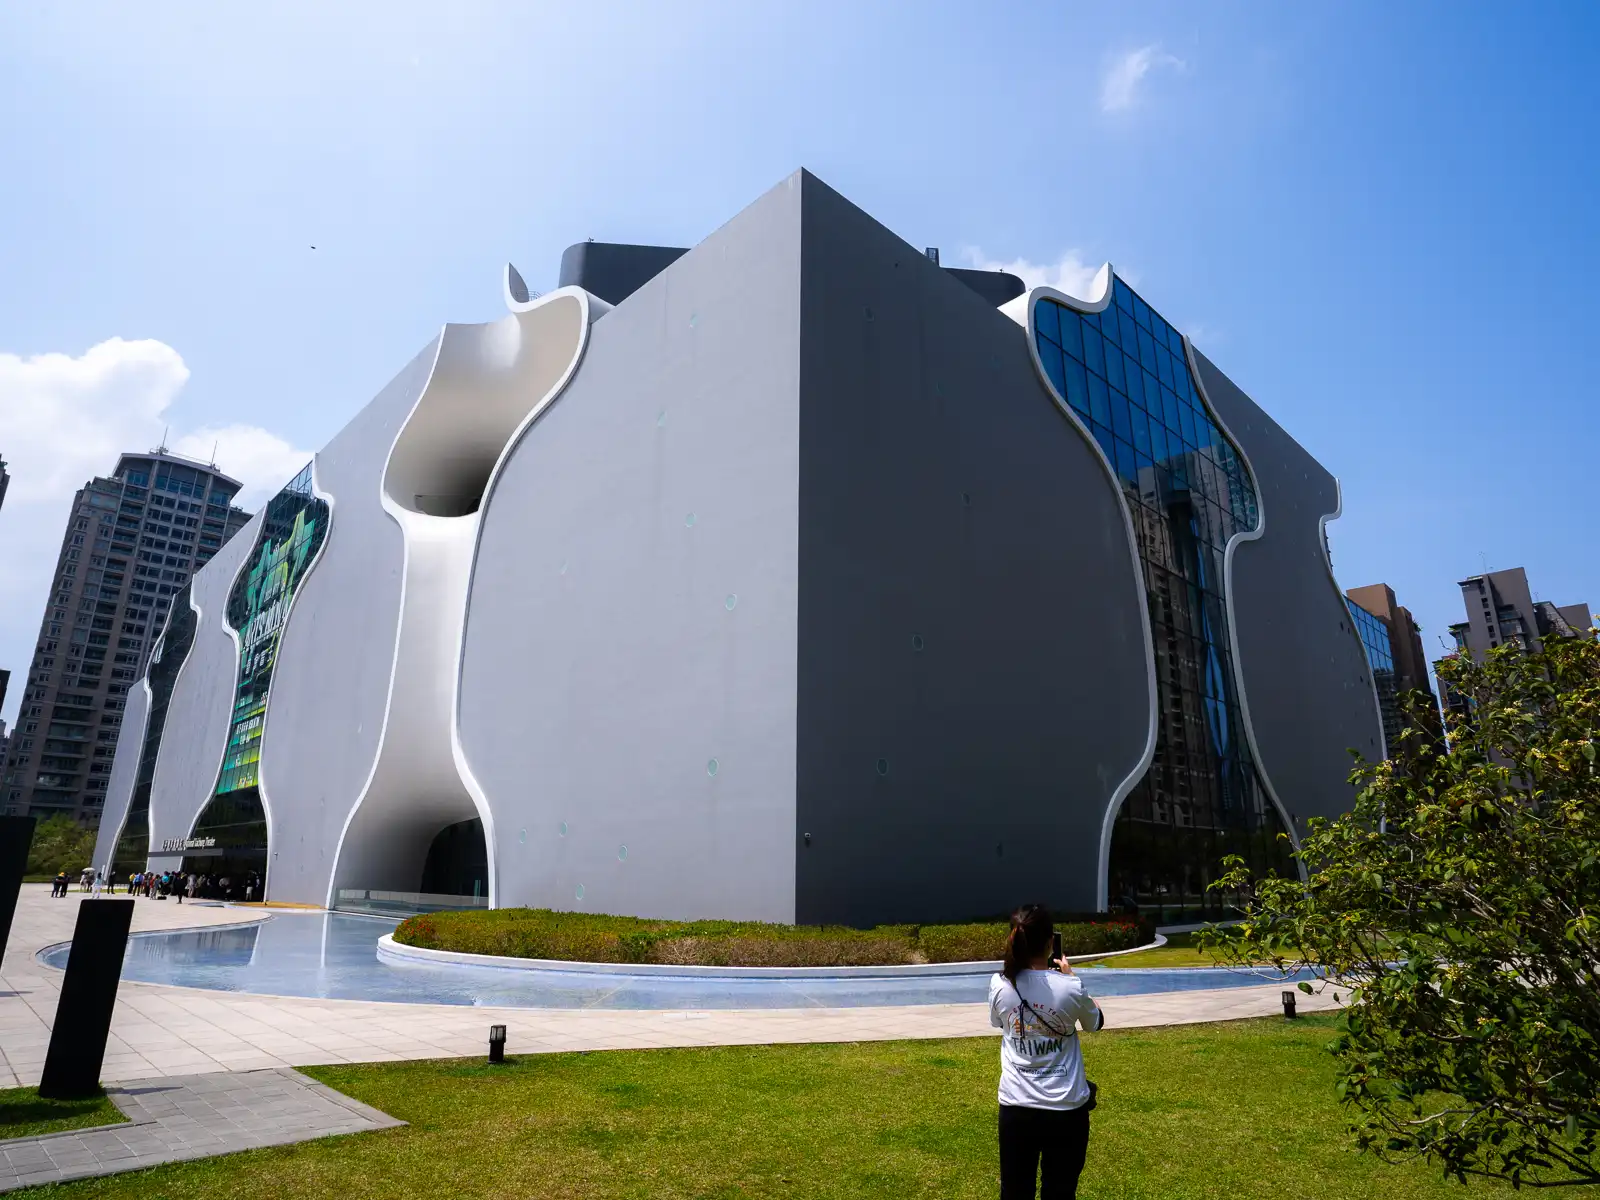 Viewed from one of its corners, the National Taichung Theater appears as a giant rectangular structure.